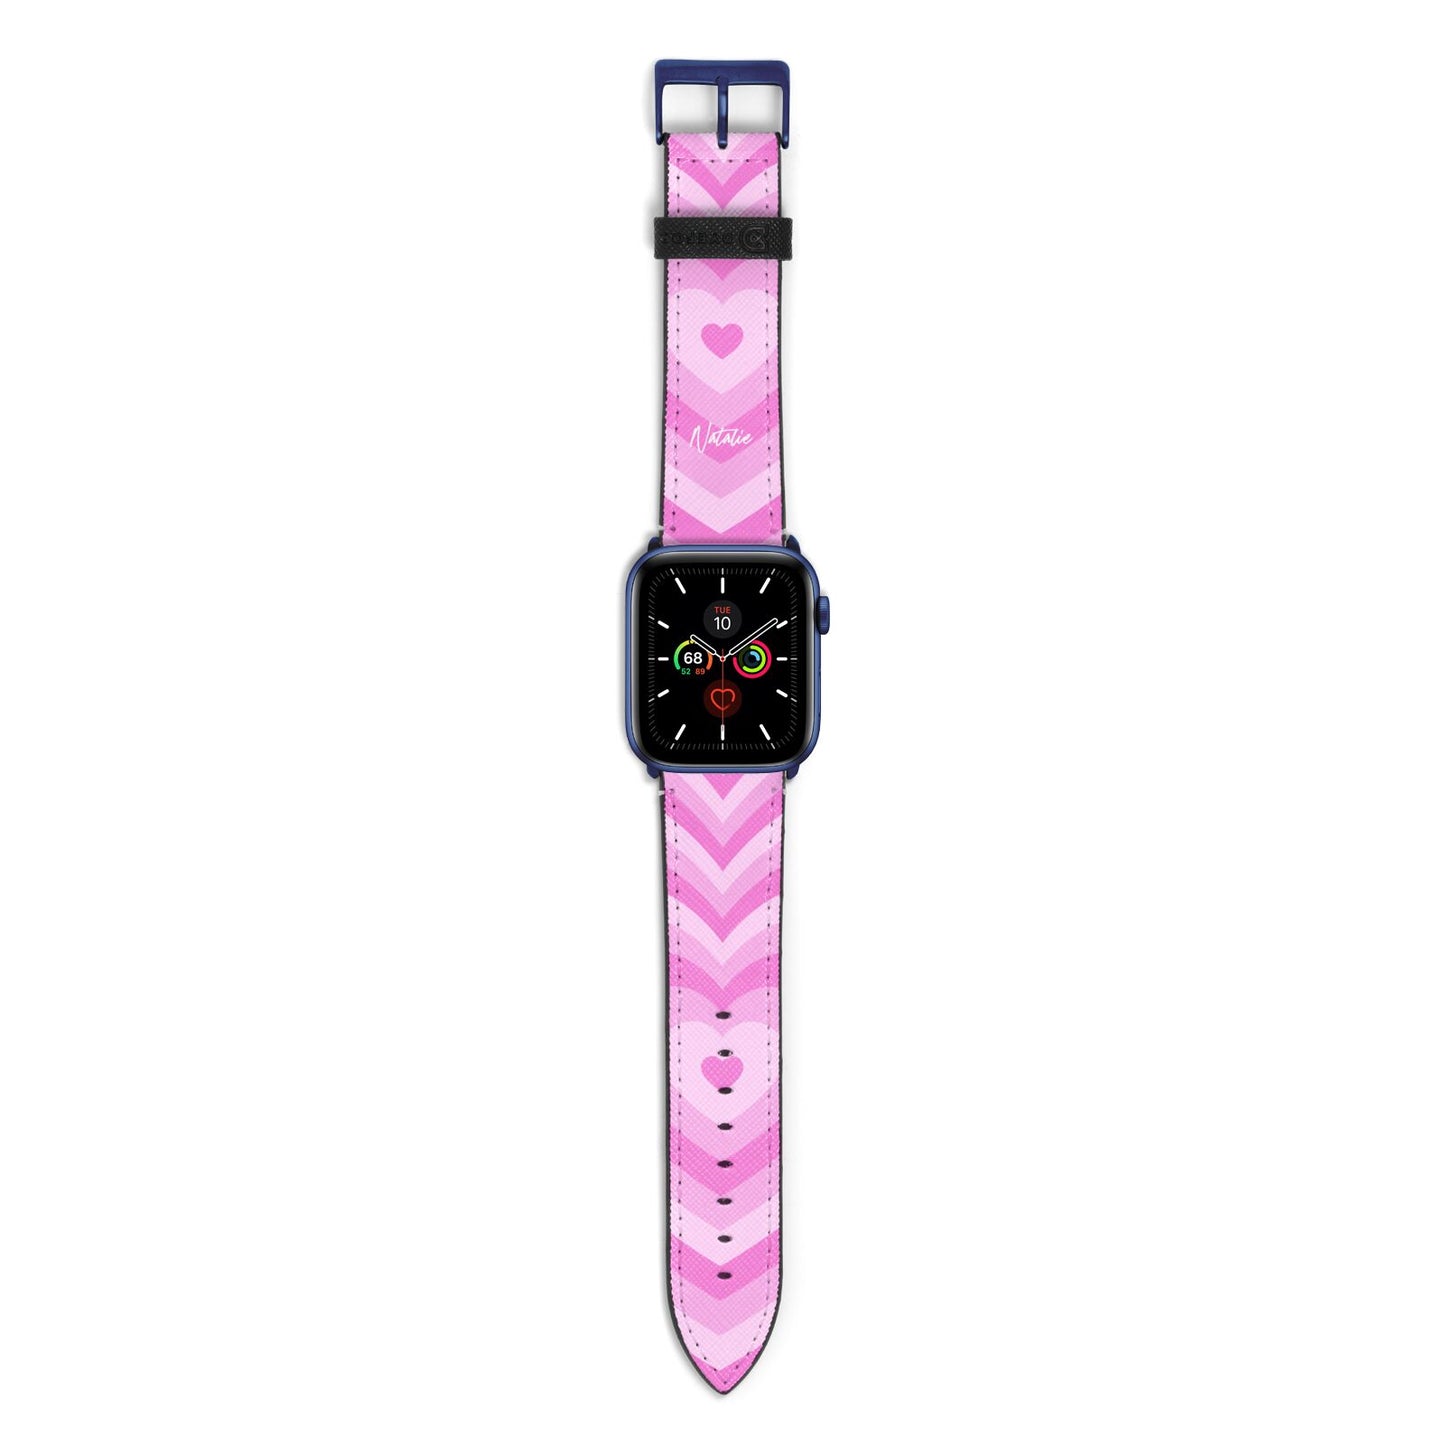 Personalised Pink Heart Apple Watch Strap with Blue Hardware